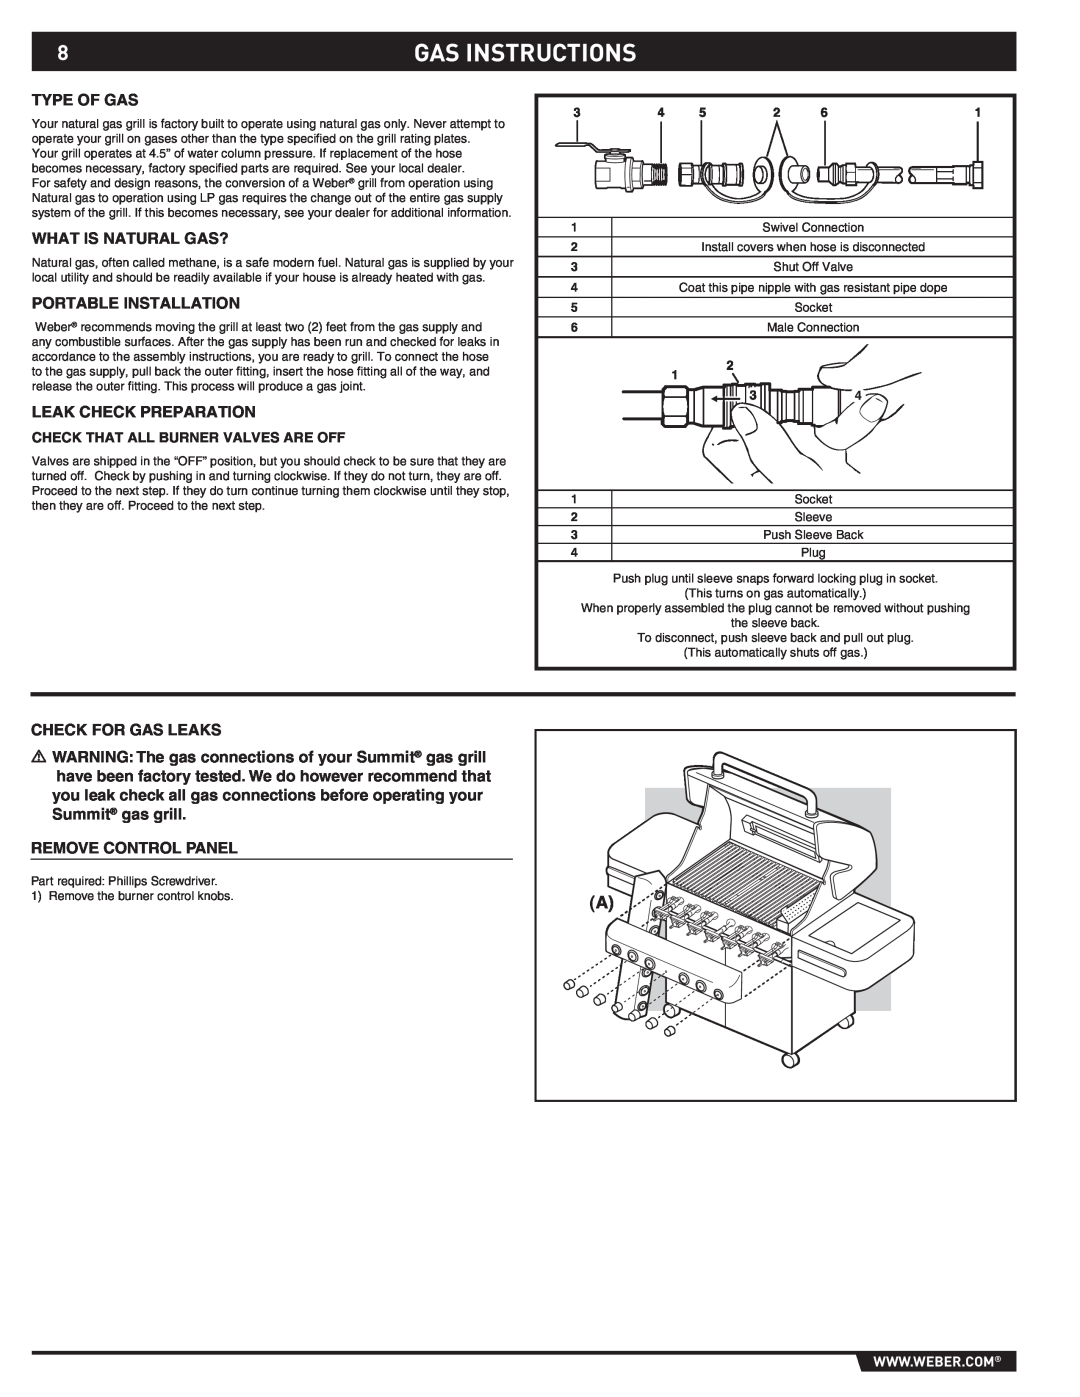 Weber S-470TM manual Gas Instructions, Swivel Connection, Socket, Male Connection, Sleeve, Plug 